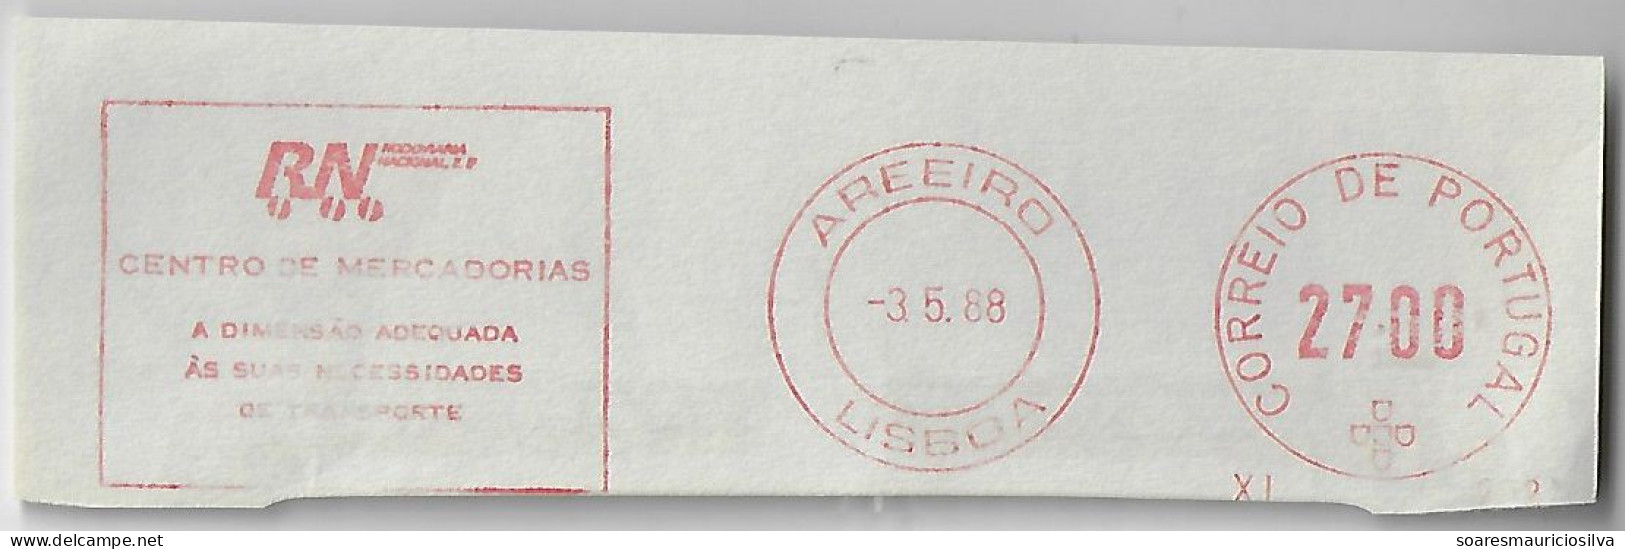 Portugal 1988 Cover Fragment Meter Stamp Frama Slogan National Road Co. From Lisbon Areeiro Agency Transport Bus - Bussen